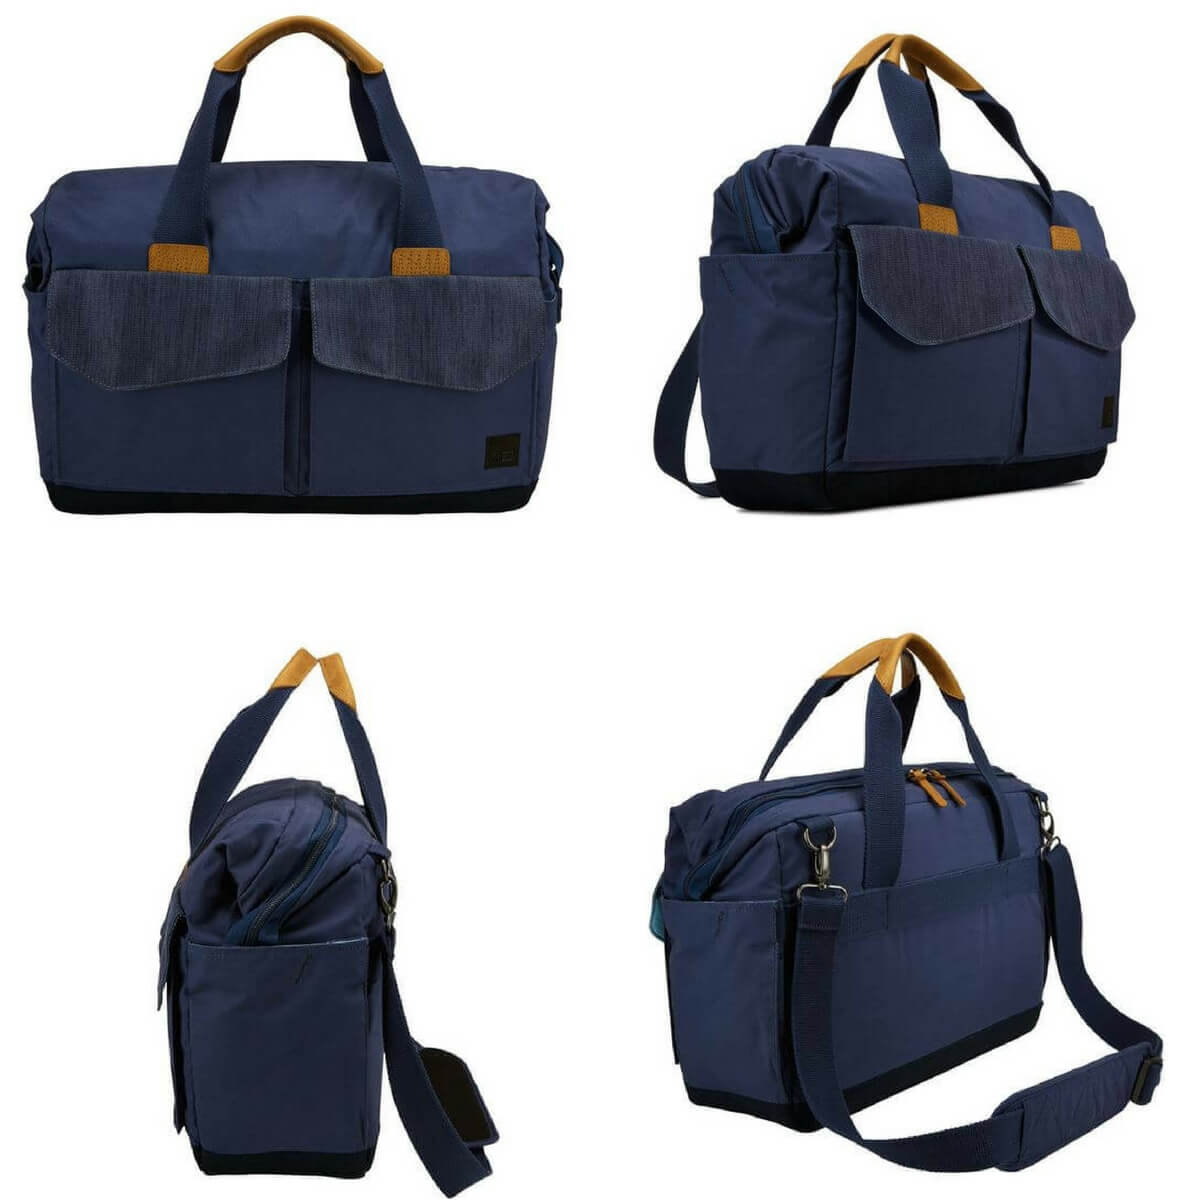 Case Logic LoDo Satchel in Navy Blue from all angles.